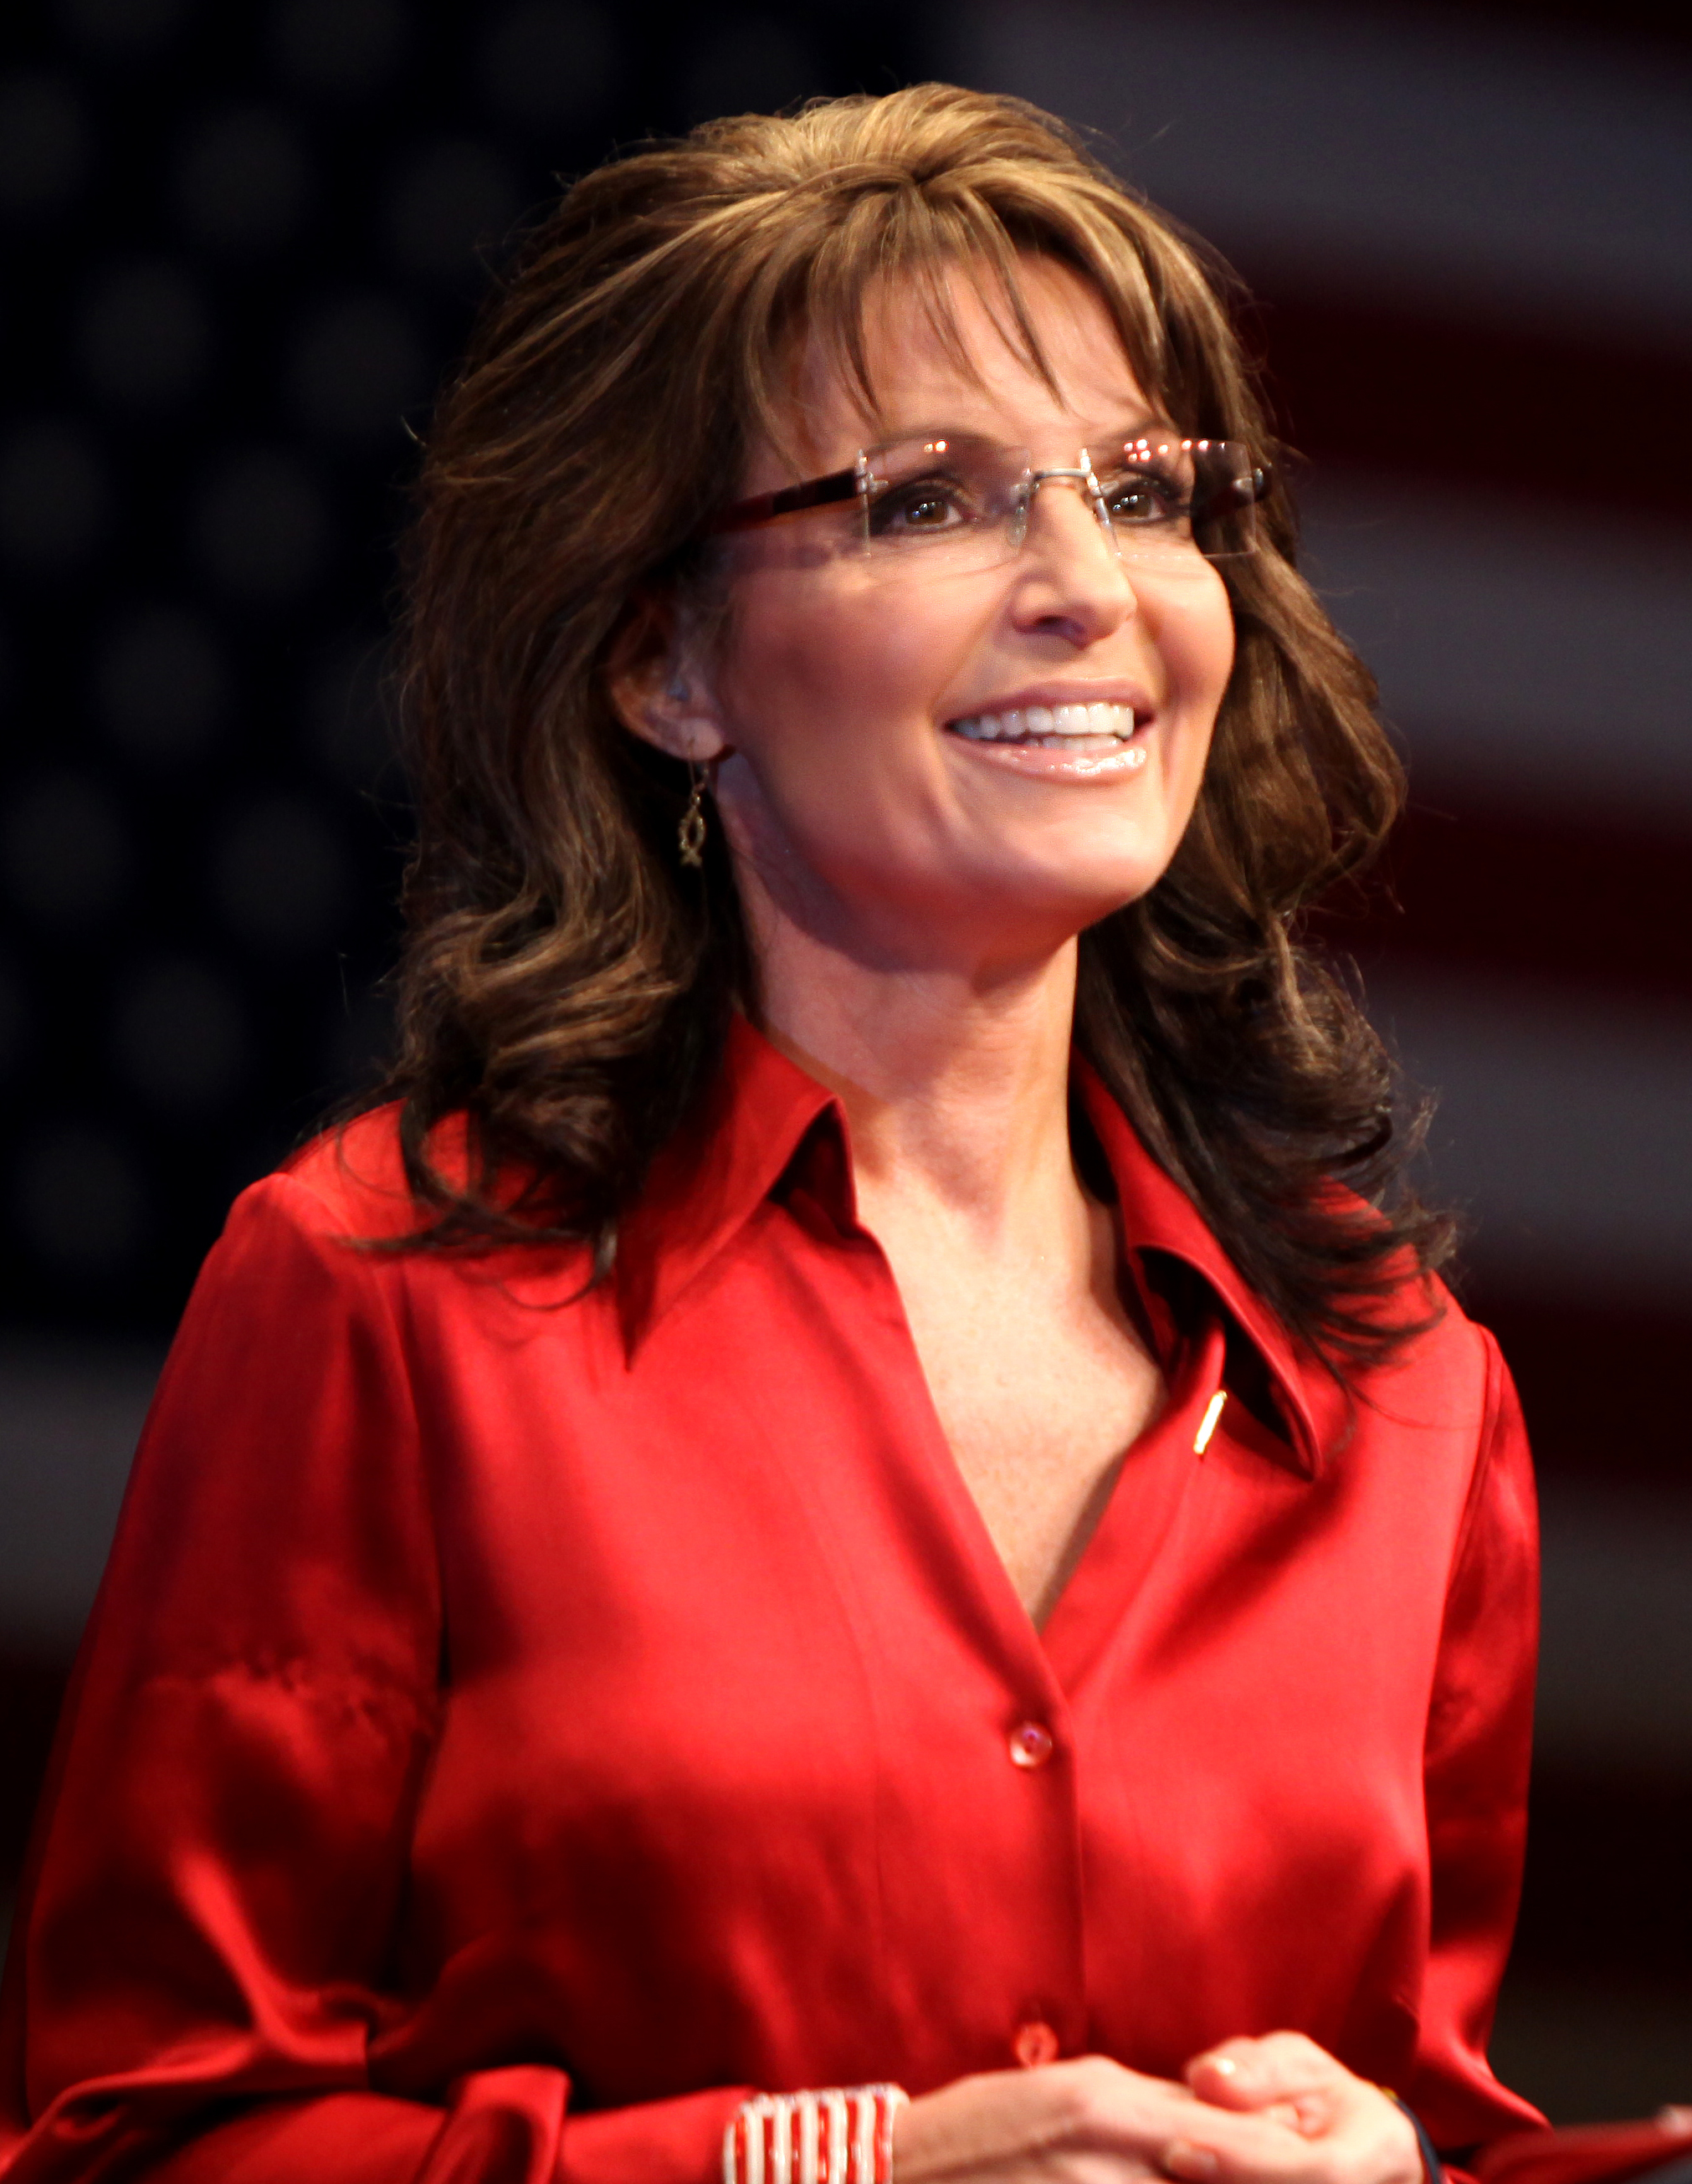 "Sarah Palin by Gage Skidmore 2" by Gage Skidmore. Licensed under CC BY-SA 3.0 via Commons - https://commons.wikimedia.org/wiki/File:Sarah_Palin_by_Gage_Skidmore_2.jpg#/media/File:Sarah_Palin_by_Gage_Skidmore_2.jpg